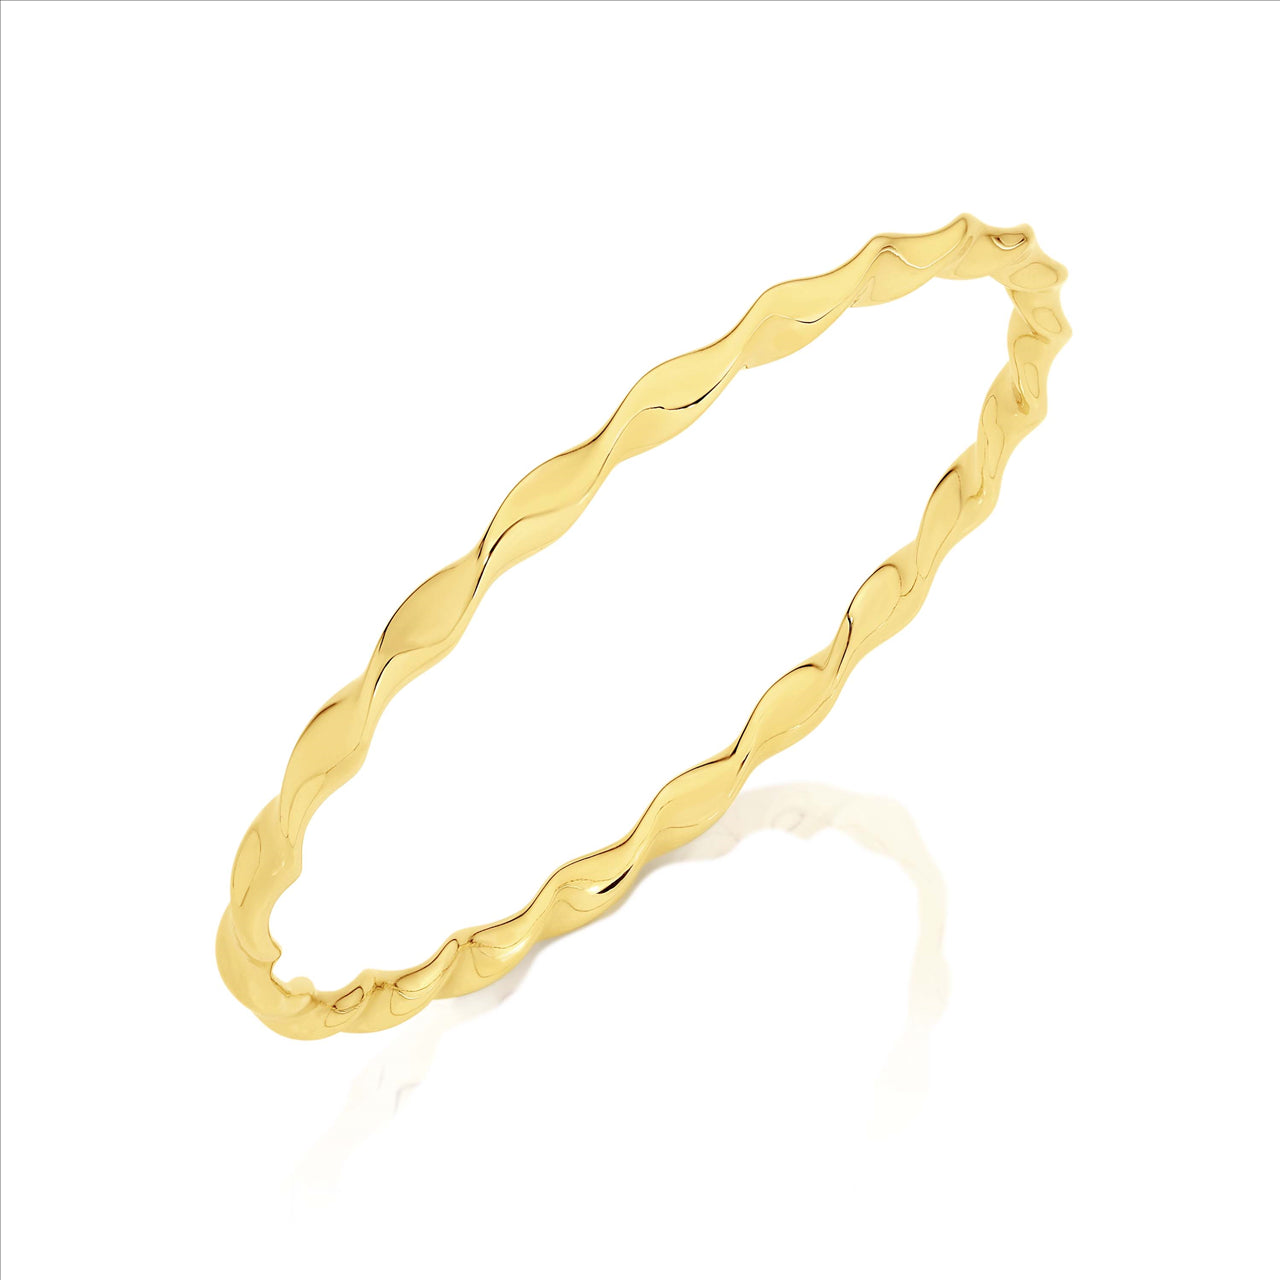 Wave Pattern Bangle in Yellow Gold